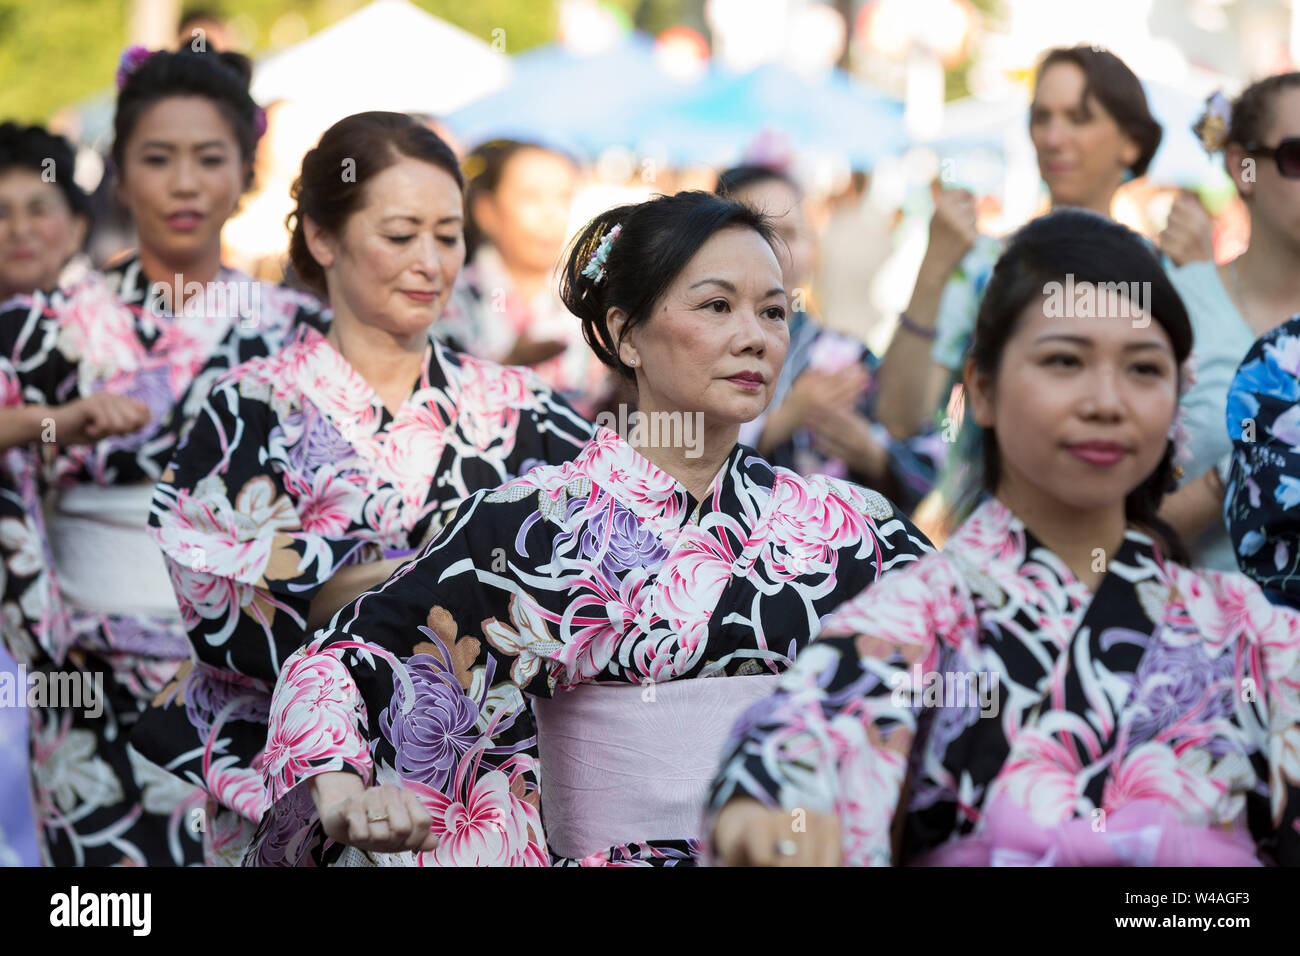 Women wearing traditional yukata robes perform a Bon dance during the 87th annual Bon Odori Festival in Seattle, Washington on July 20, 2019. The lively summer festival features traditional music and folk dance to welcome the spirits of the dead and celebrate the lives of ancestors. Stock Photo